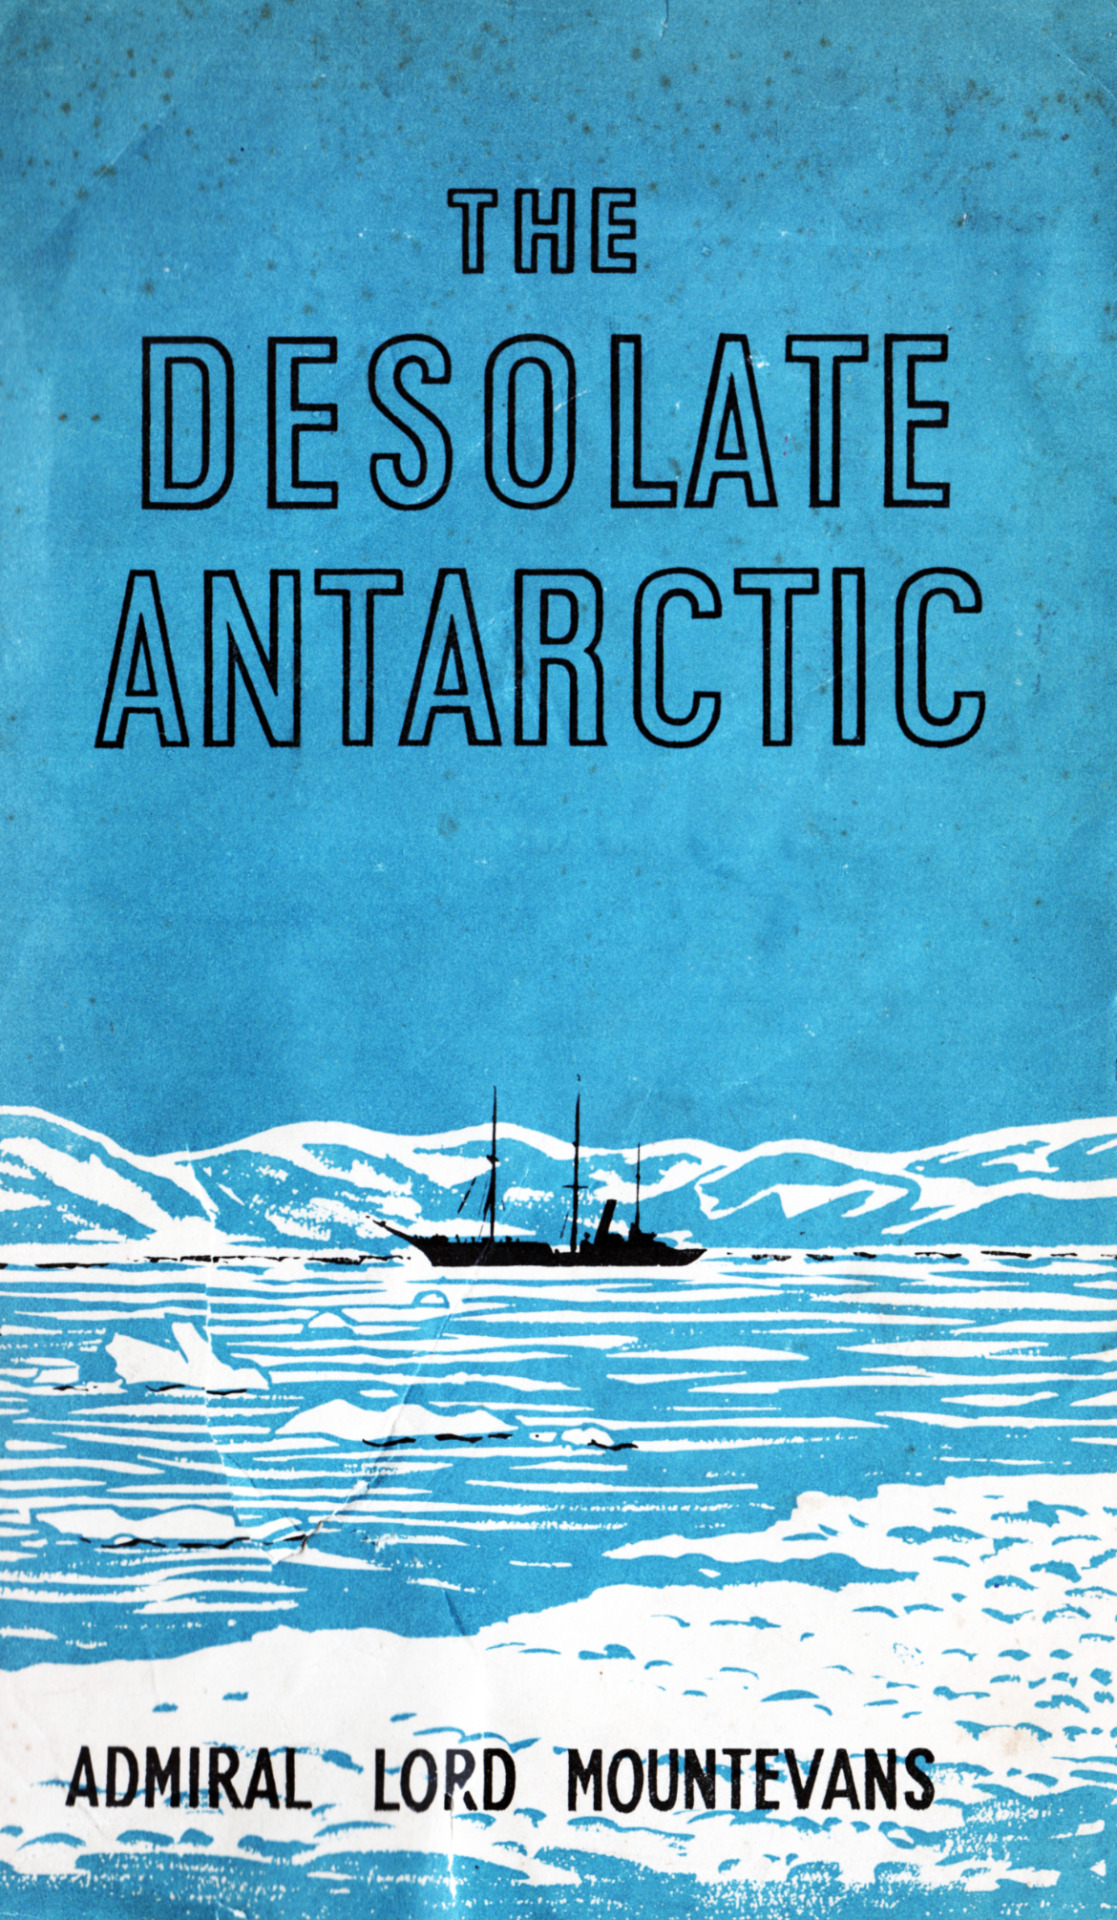 Cover of The Desolate Antarctic by Admiral Lord Mountevans (1950)